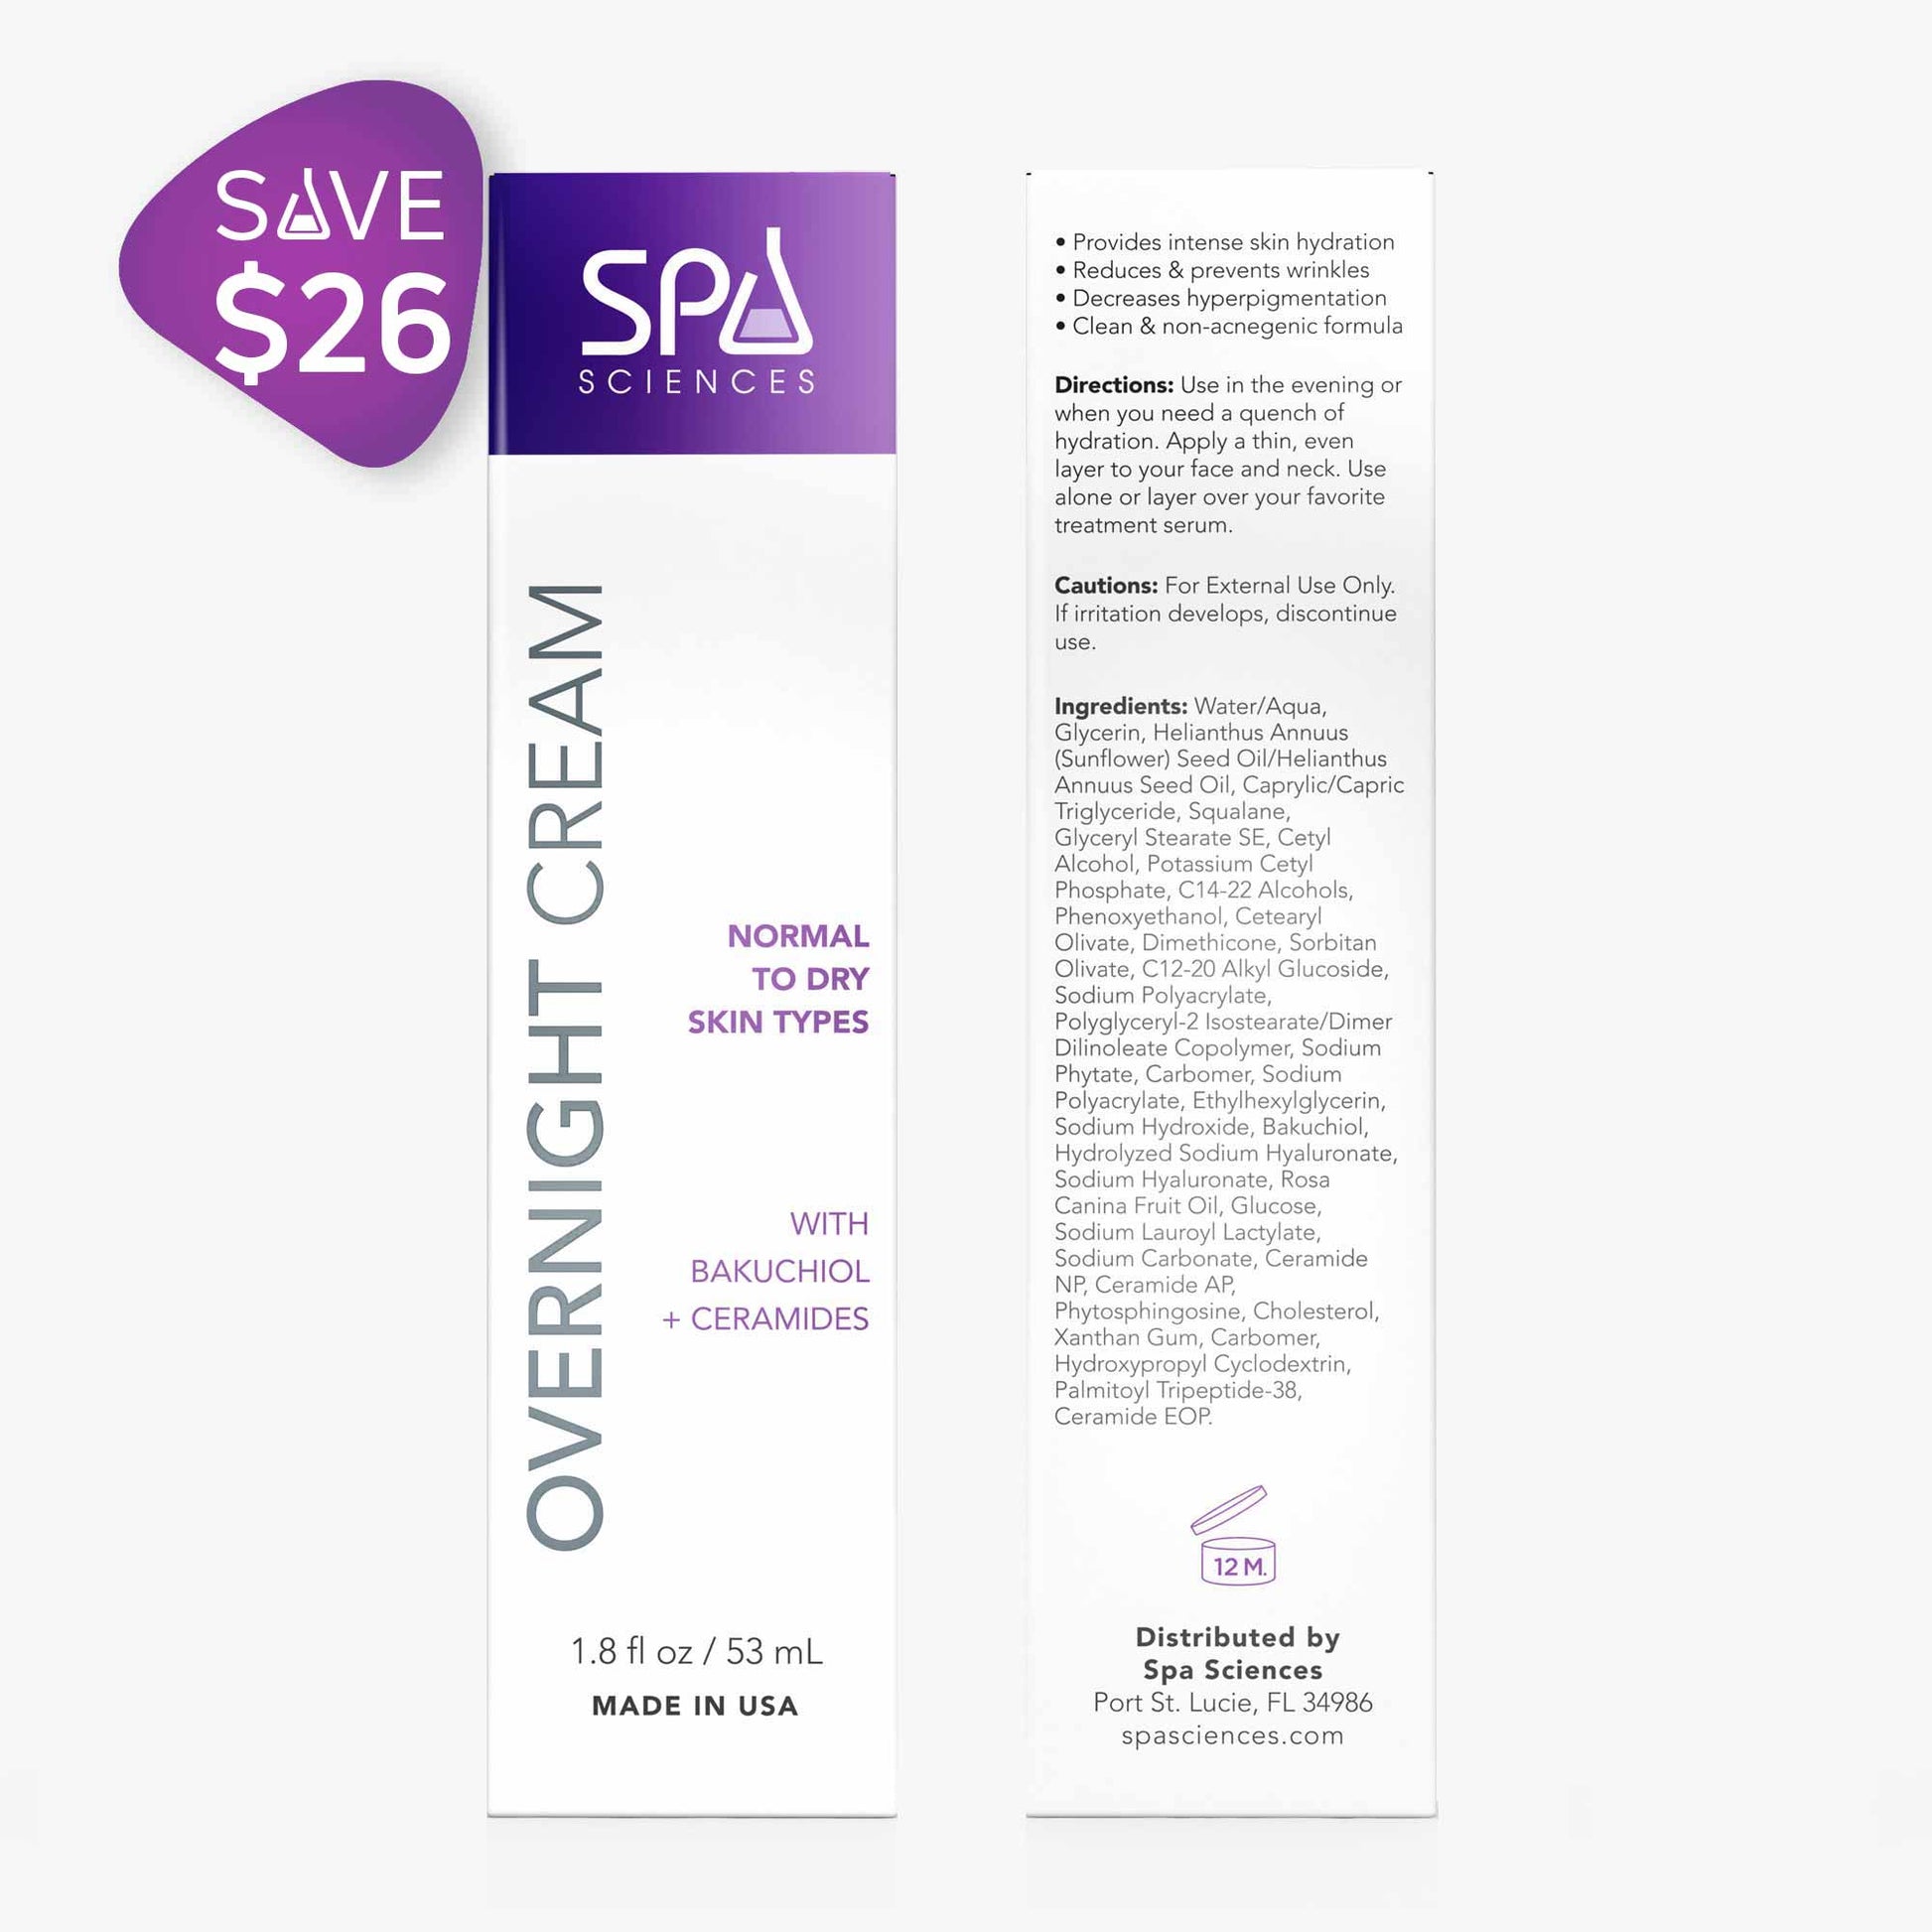 Hydration Hero night cream from Spa Sciences with a purple label.